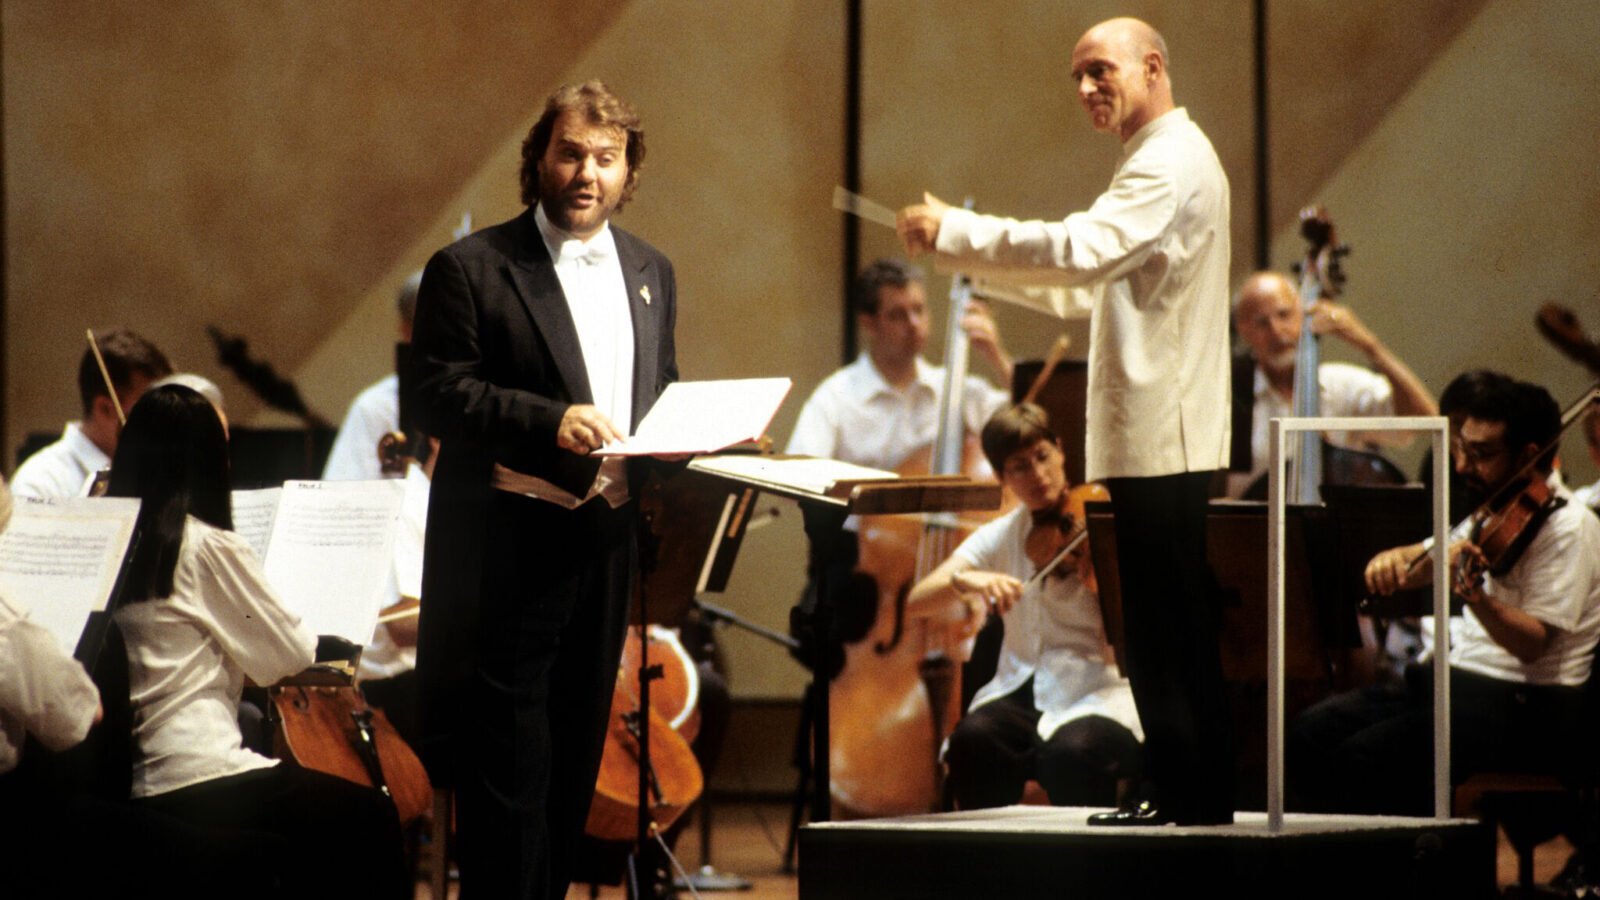 Bass-baritone Bryn Terfel performs at Ravinia in August 1998.